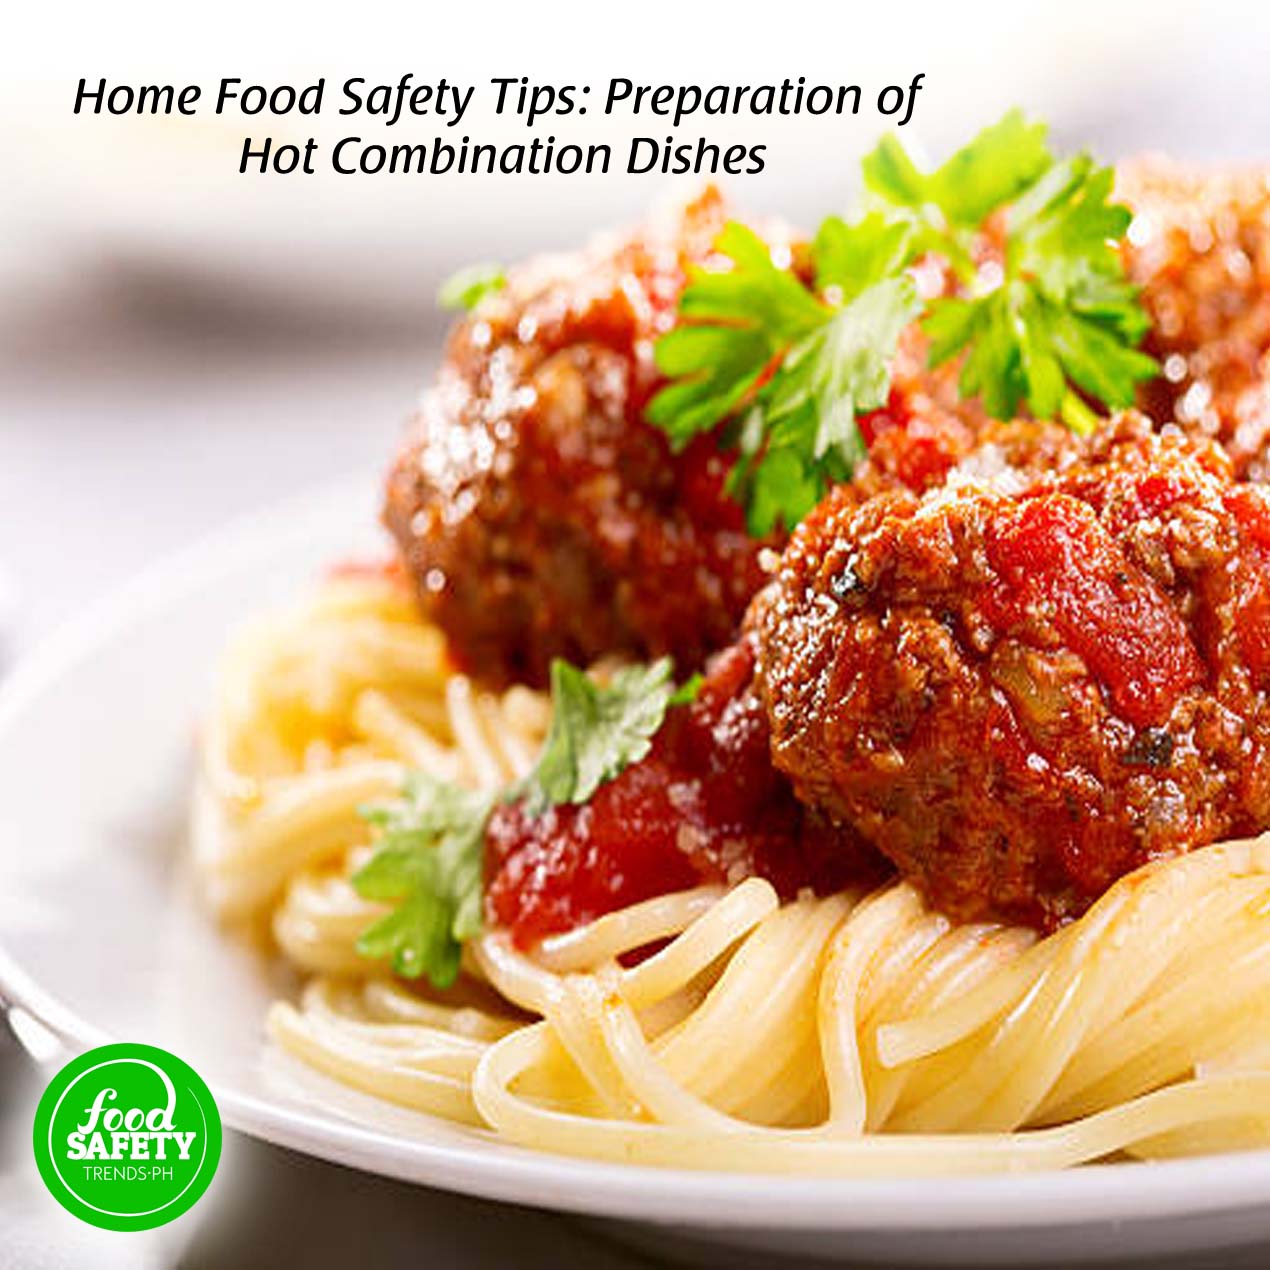 Home Food Safety Tips: Preparation of Hot Combination Dishes